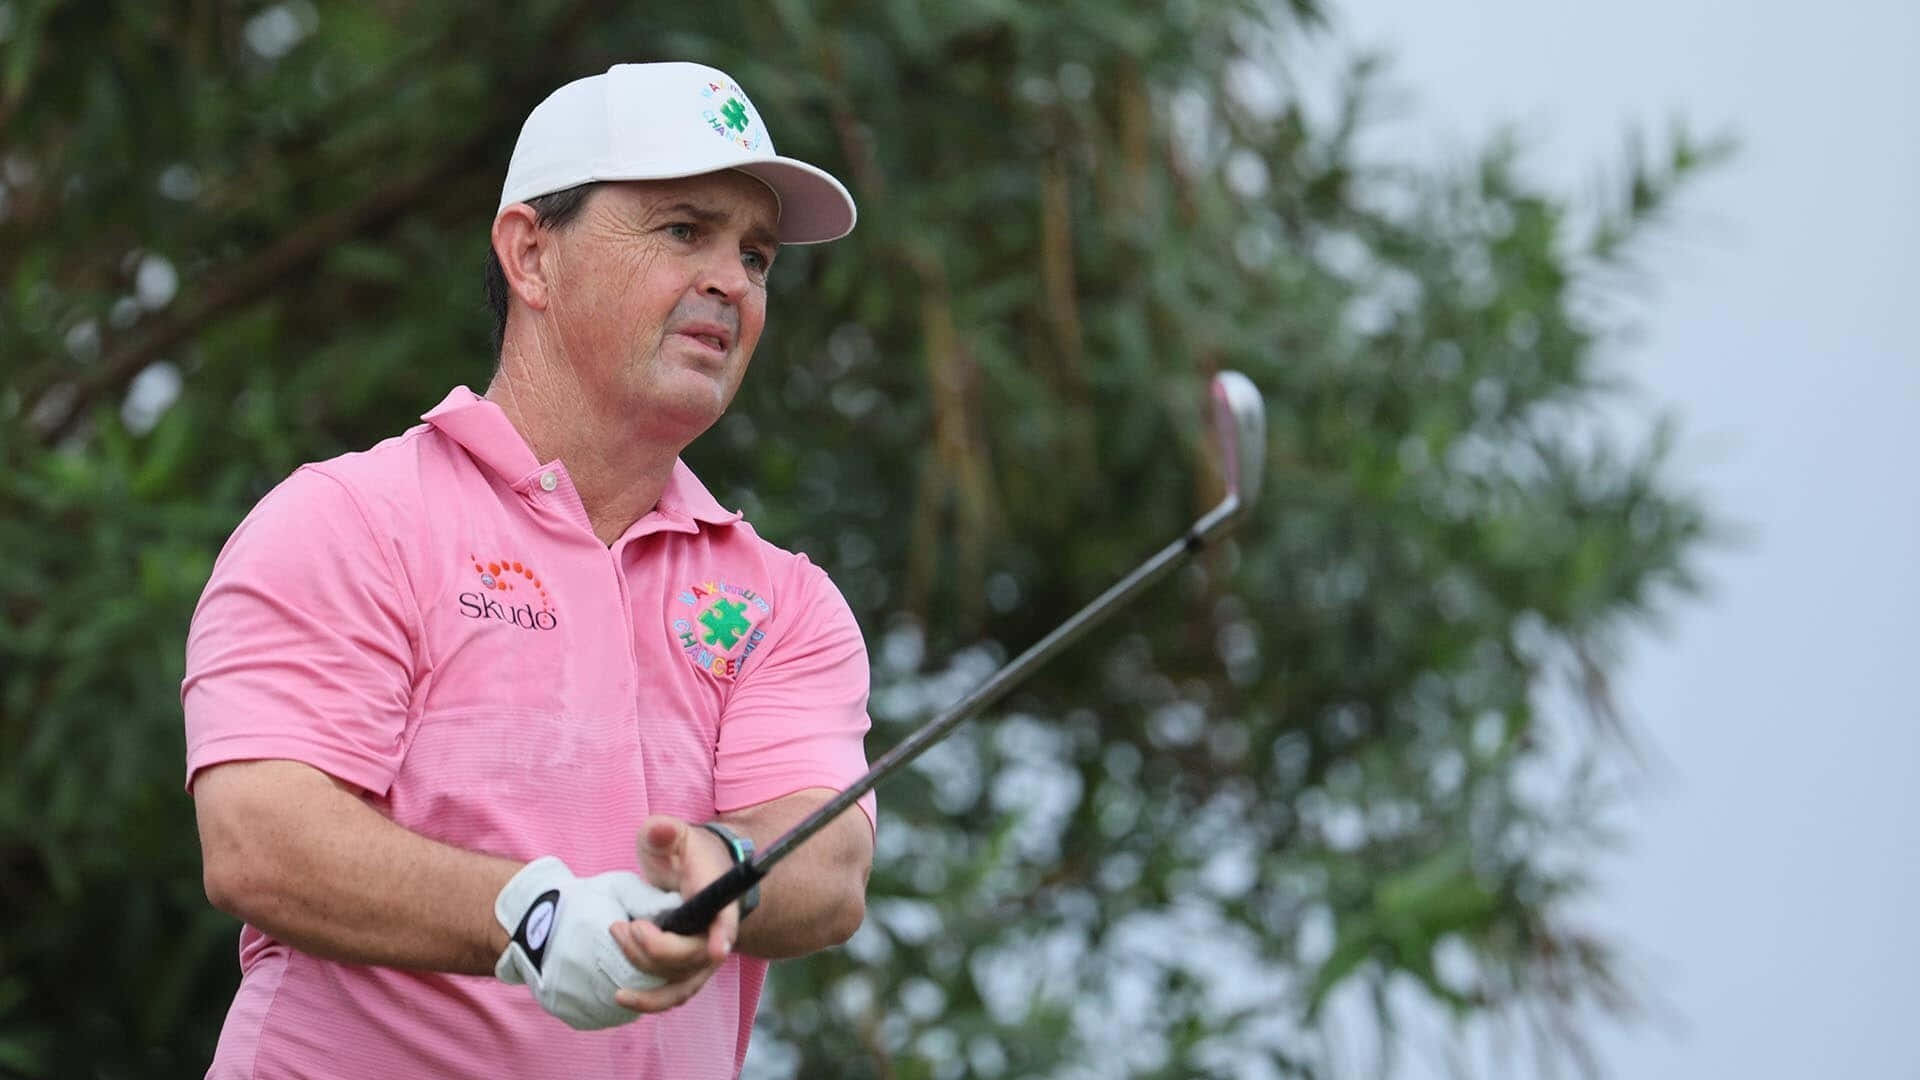 Professional Golfer Greg Chalmers Wearing a Pink Collared Shirt Wallpaper